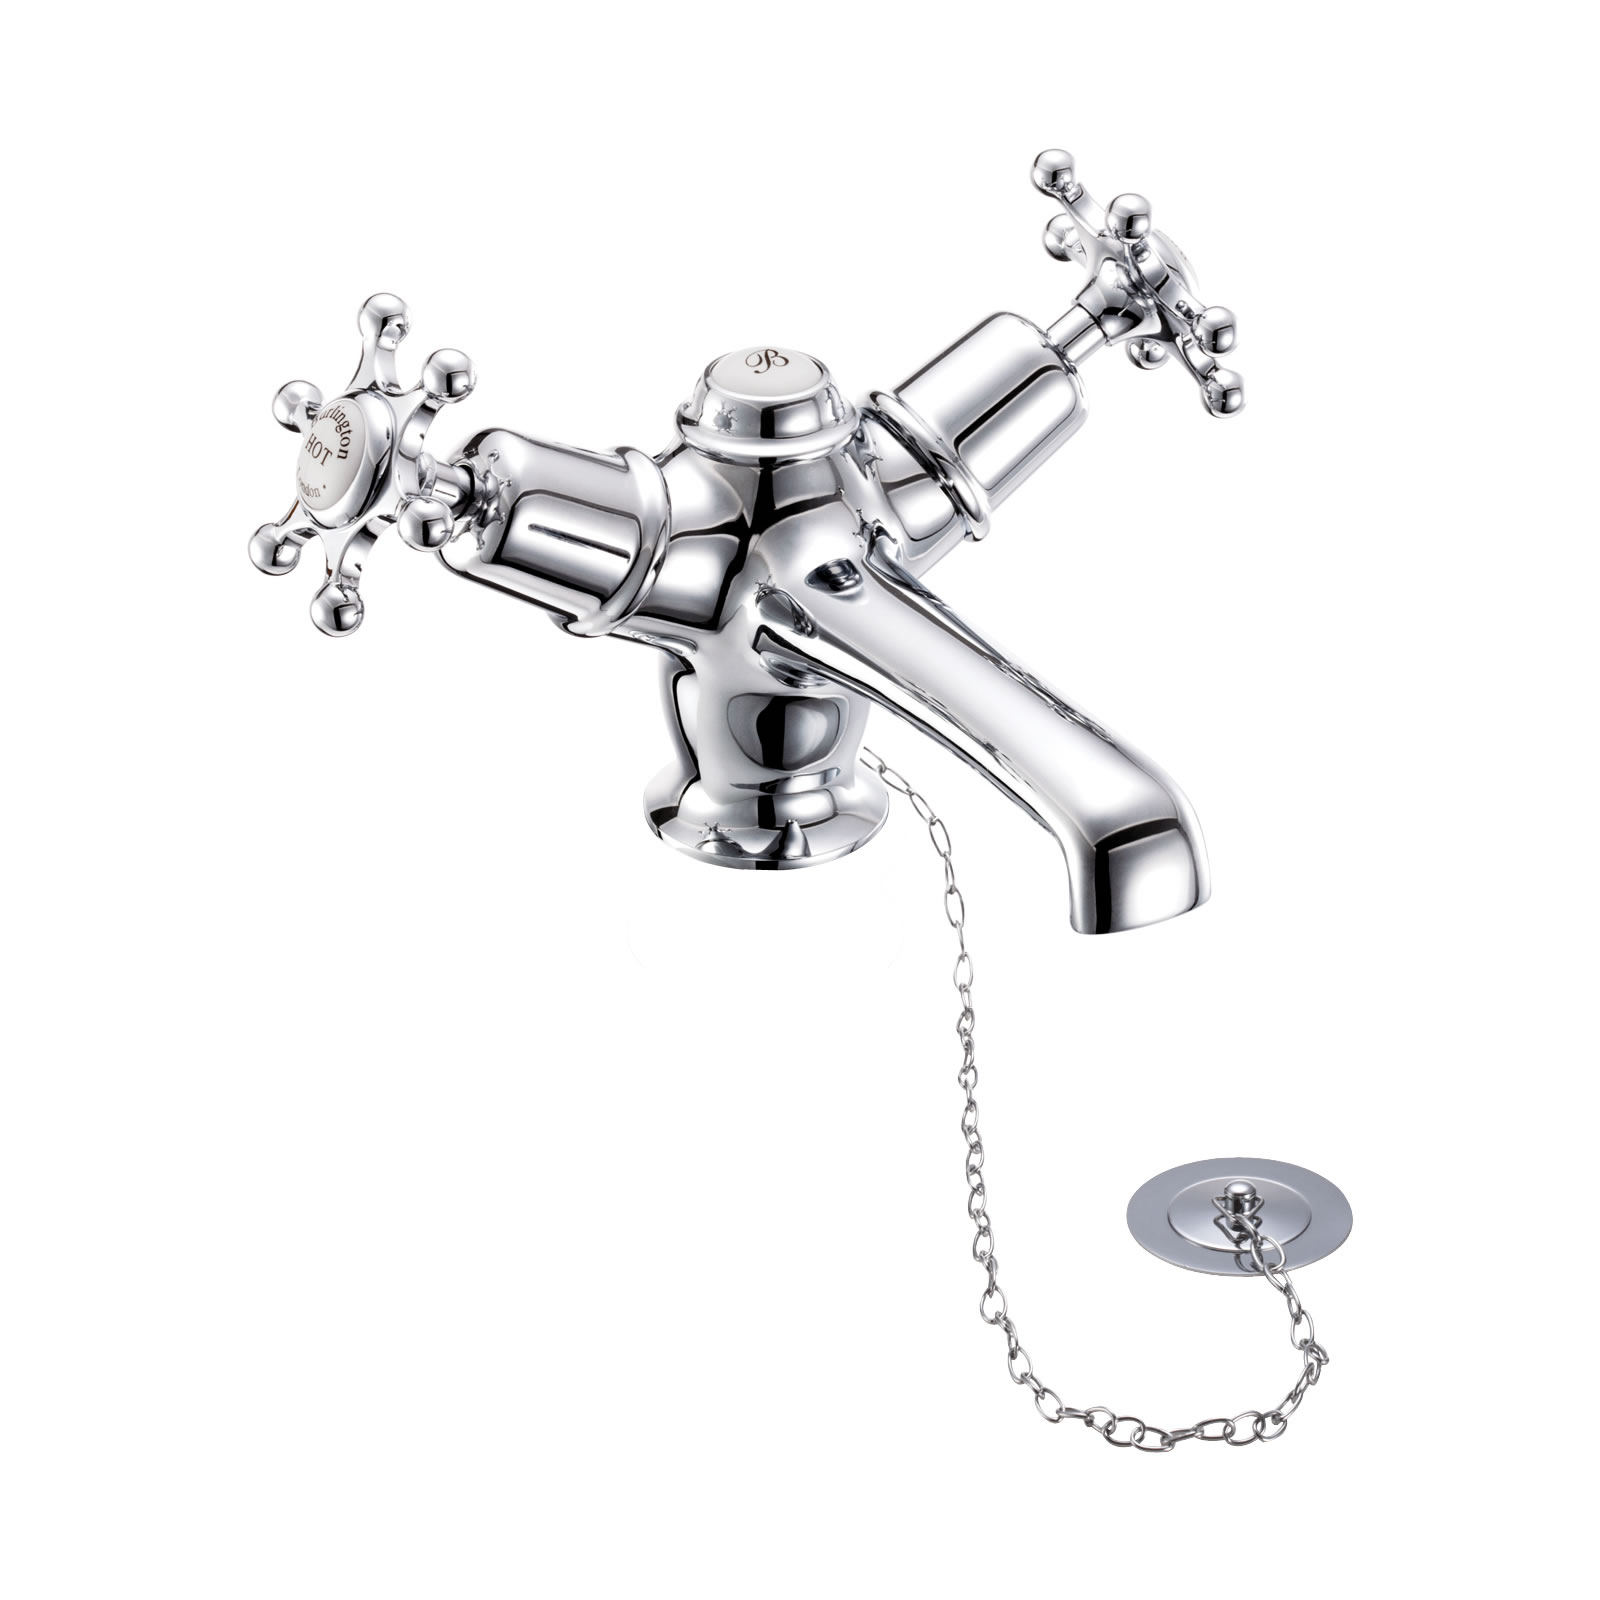 Birkenhead basin mixer with low central indice with plug and chain waste